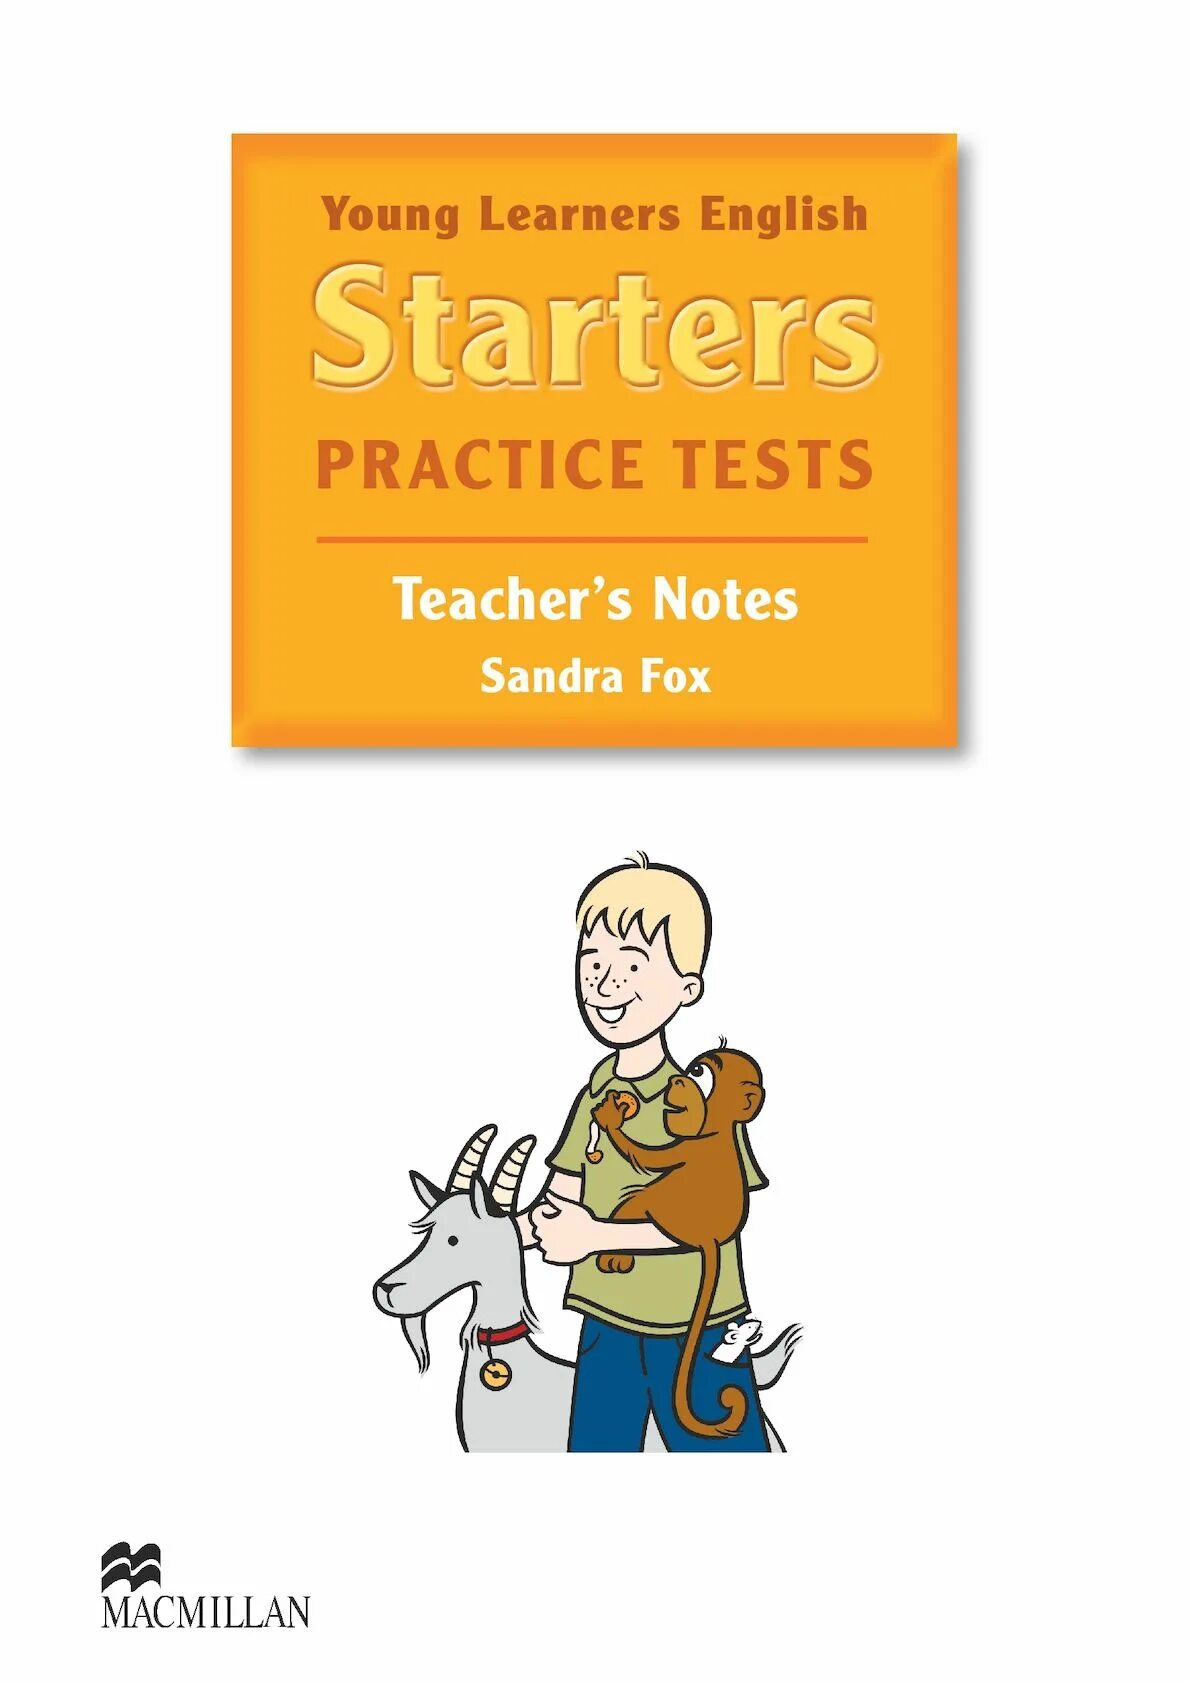 Starters practice. Young Learners Starters. Practice Tests for Starters. Starter English Test. English Practice Starter.